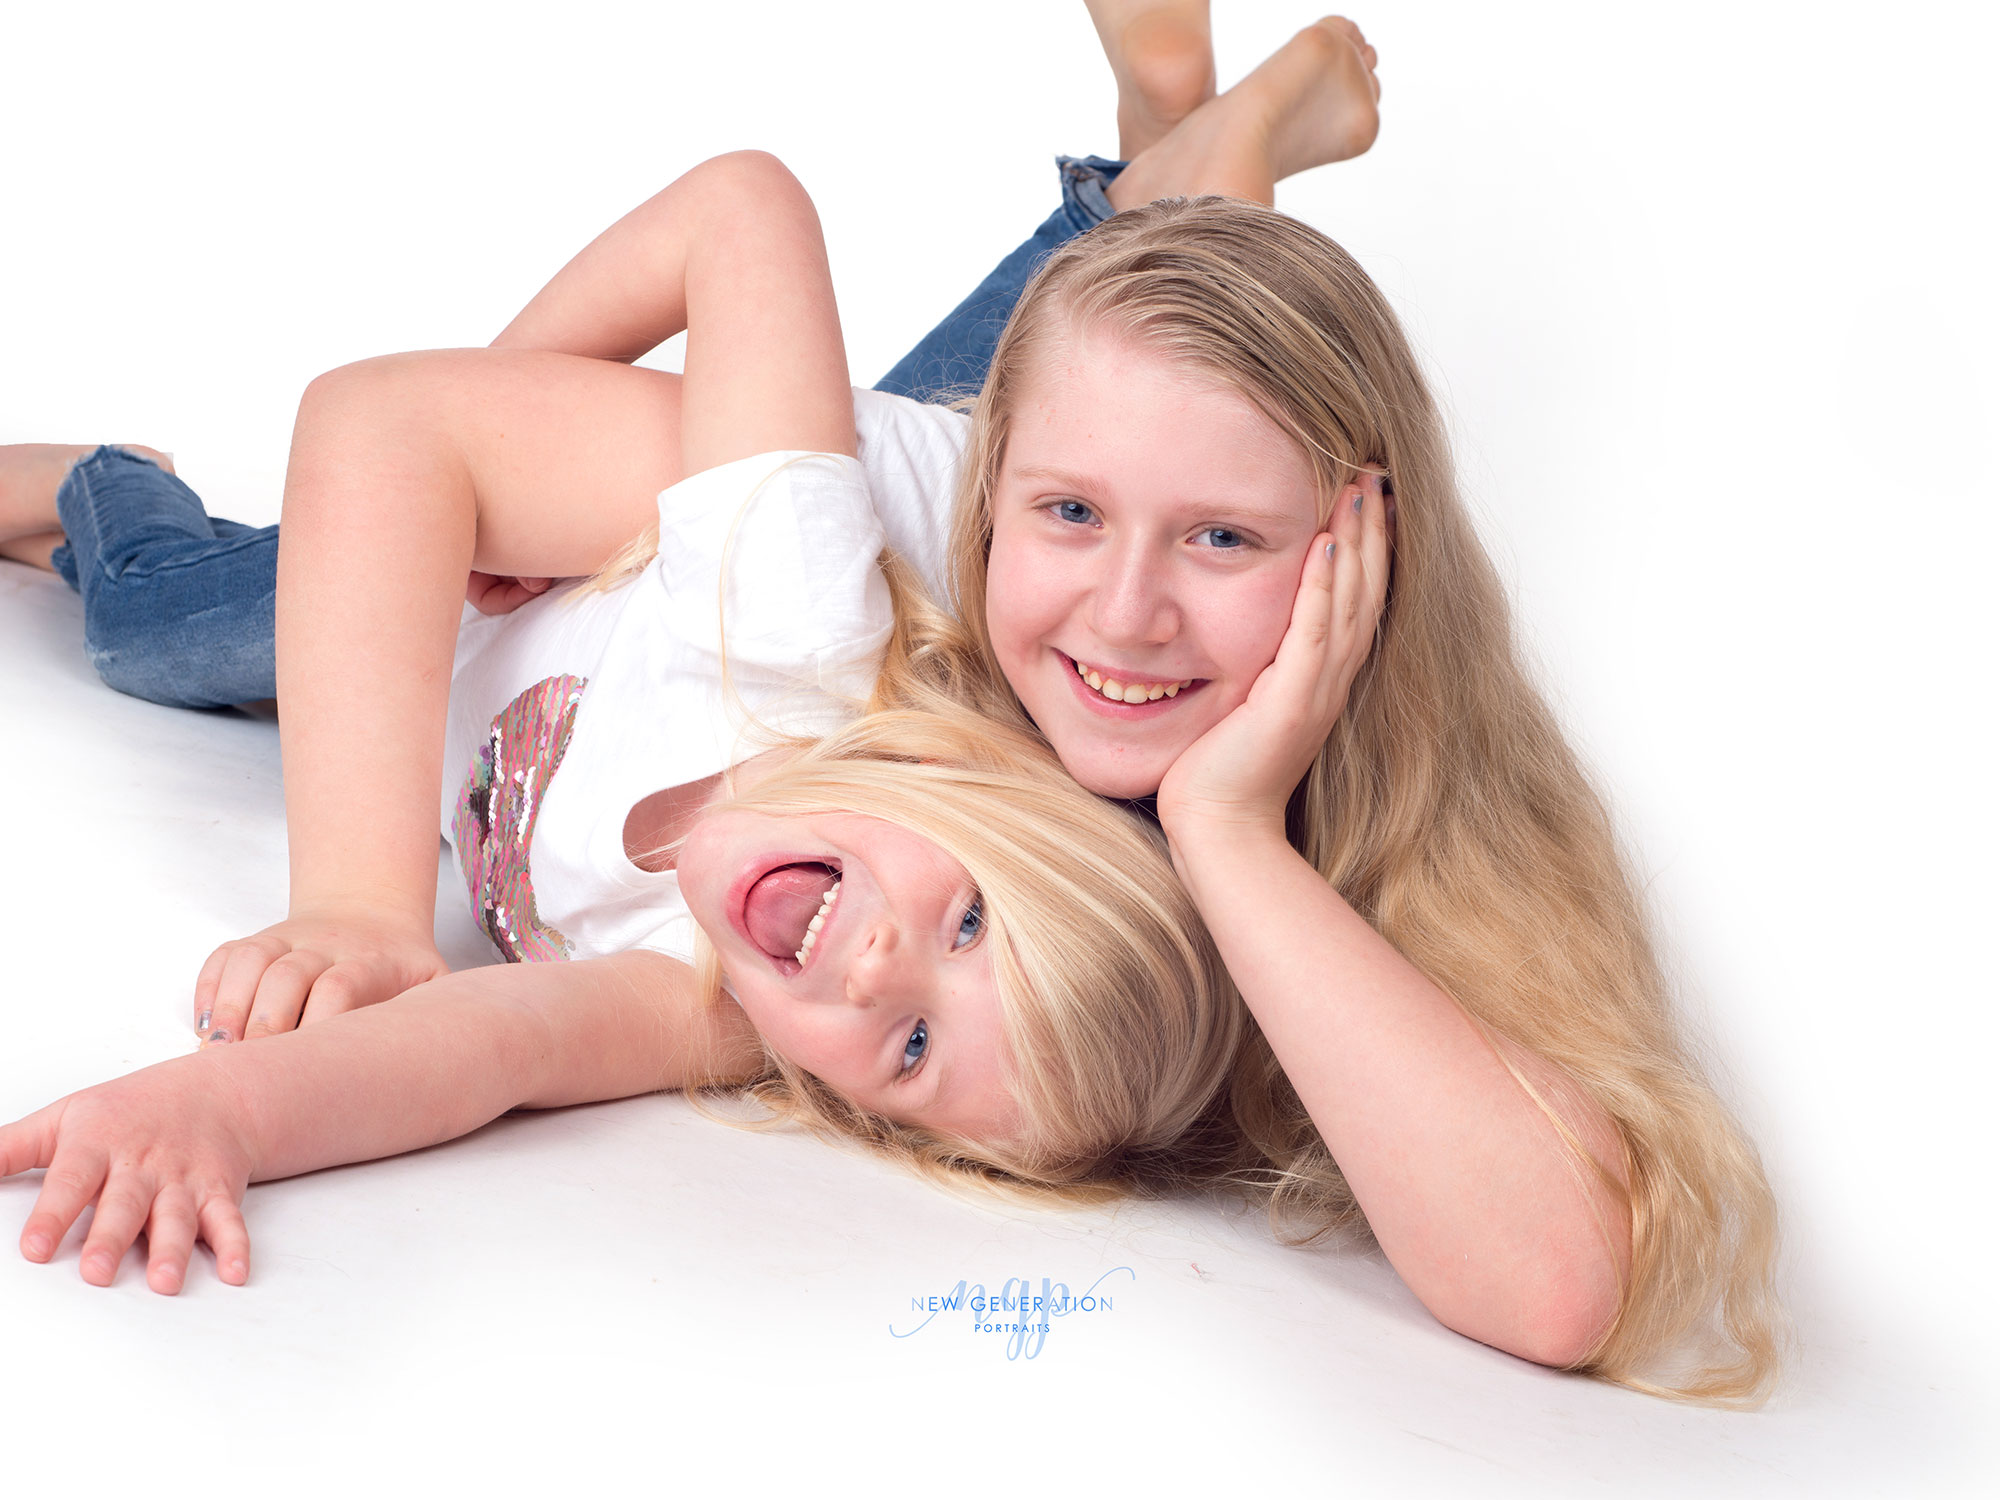 Sisters having fun playing around at their family studio portrait. Captured by New Generation Portraits